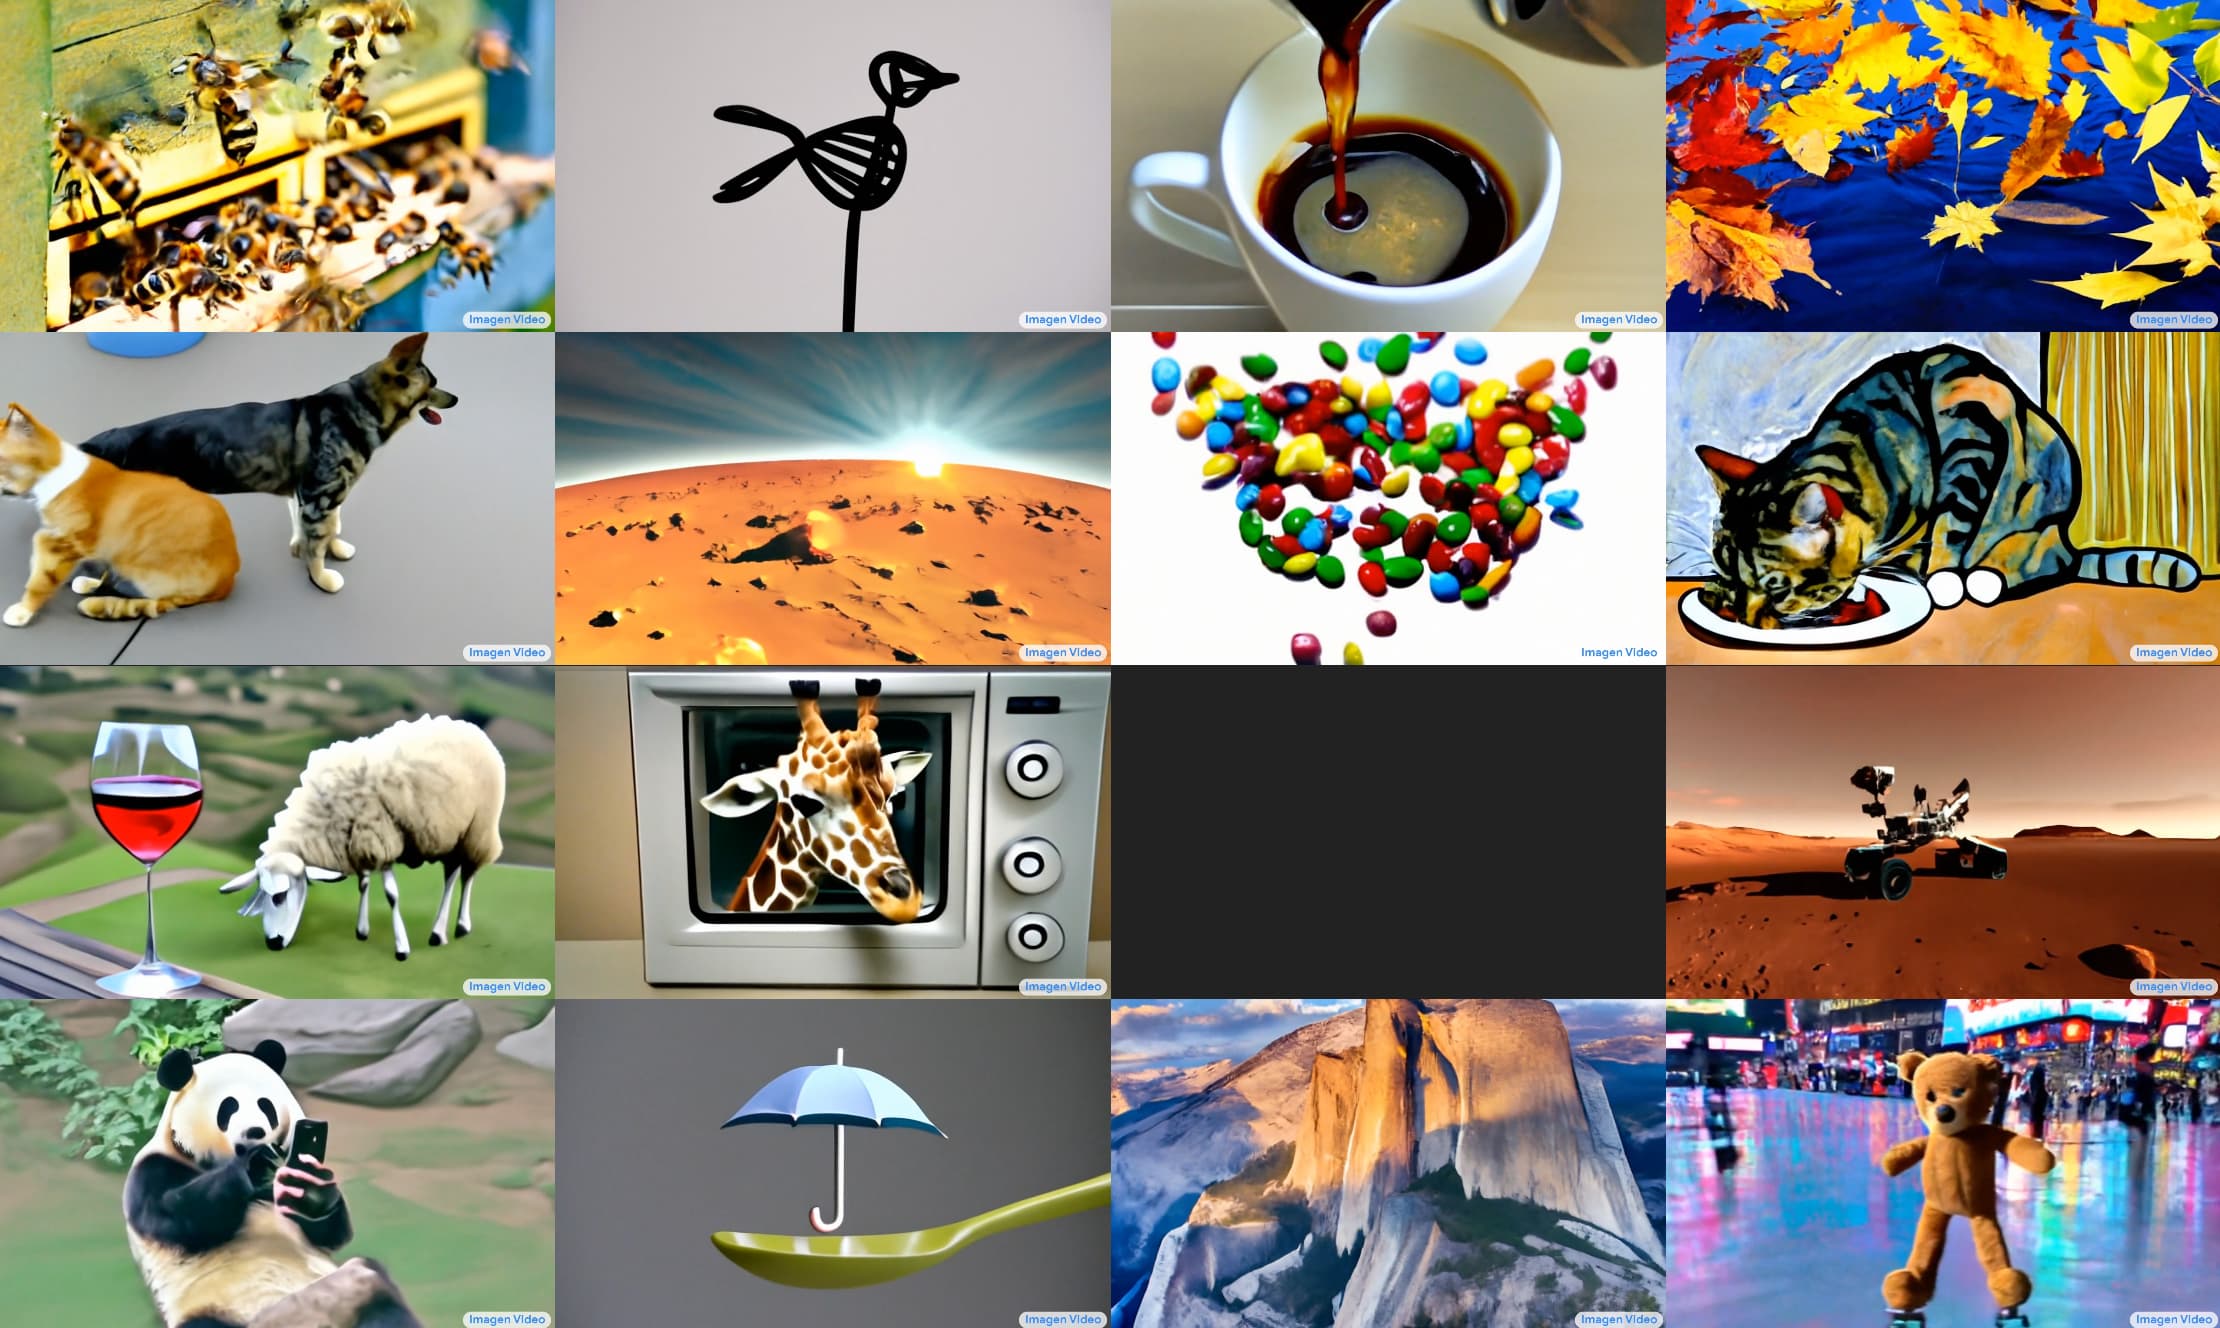 AI-generated video is coming - but not all made equal